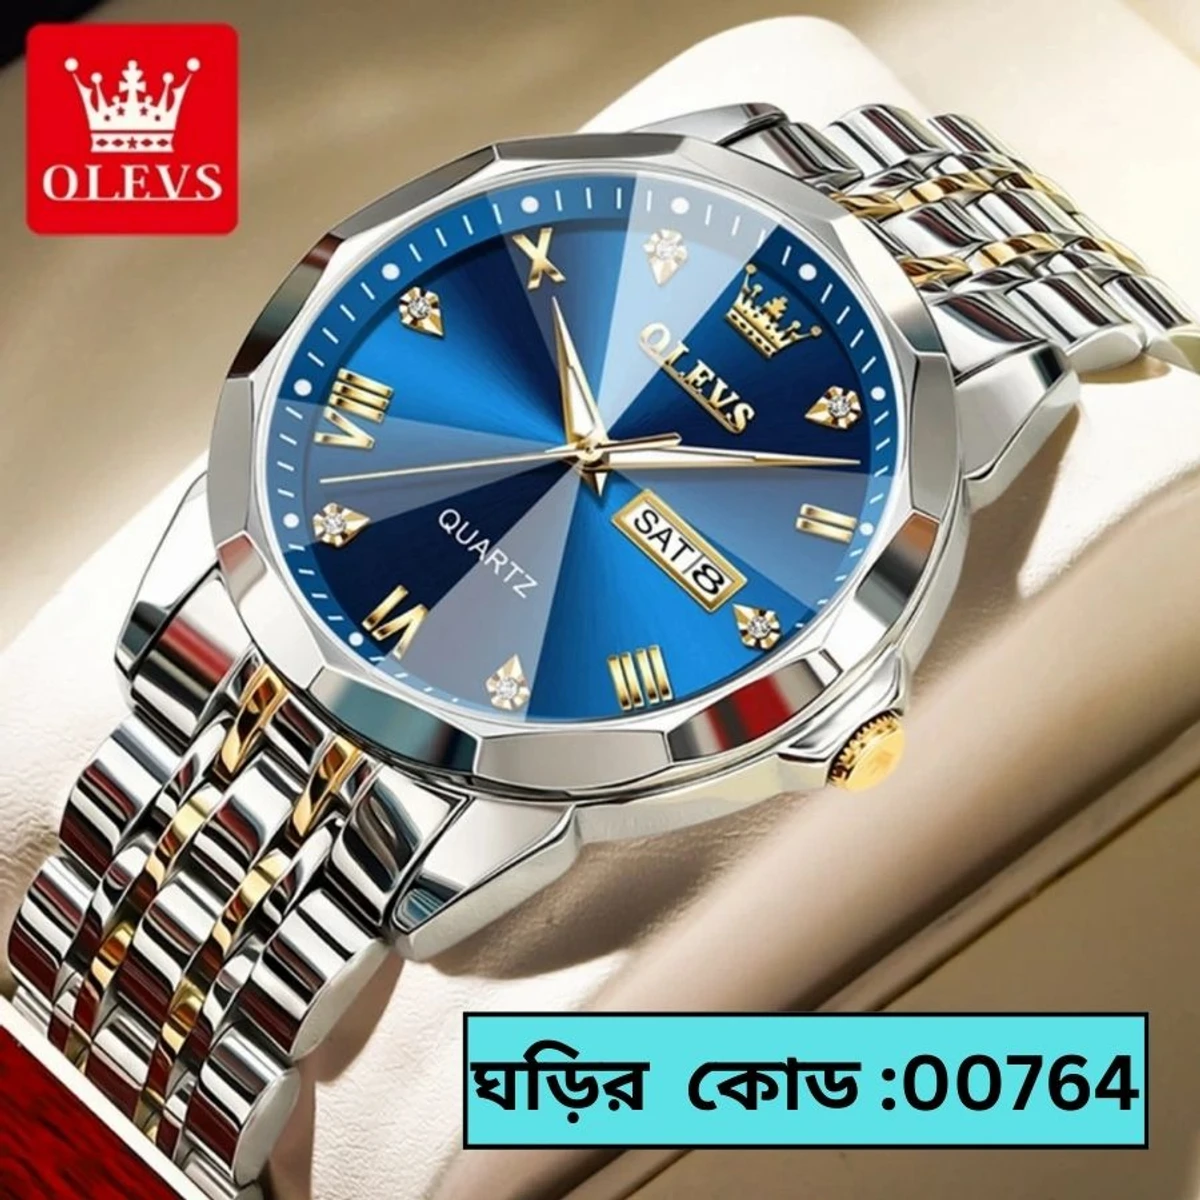 OLEVS MODEL 9931 Watch for Men Stainless Steel Watches - 9941 TOTON AR DIAL BLUE - MAN WATCH - LOCK PUSH